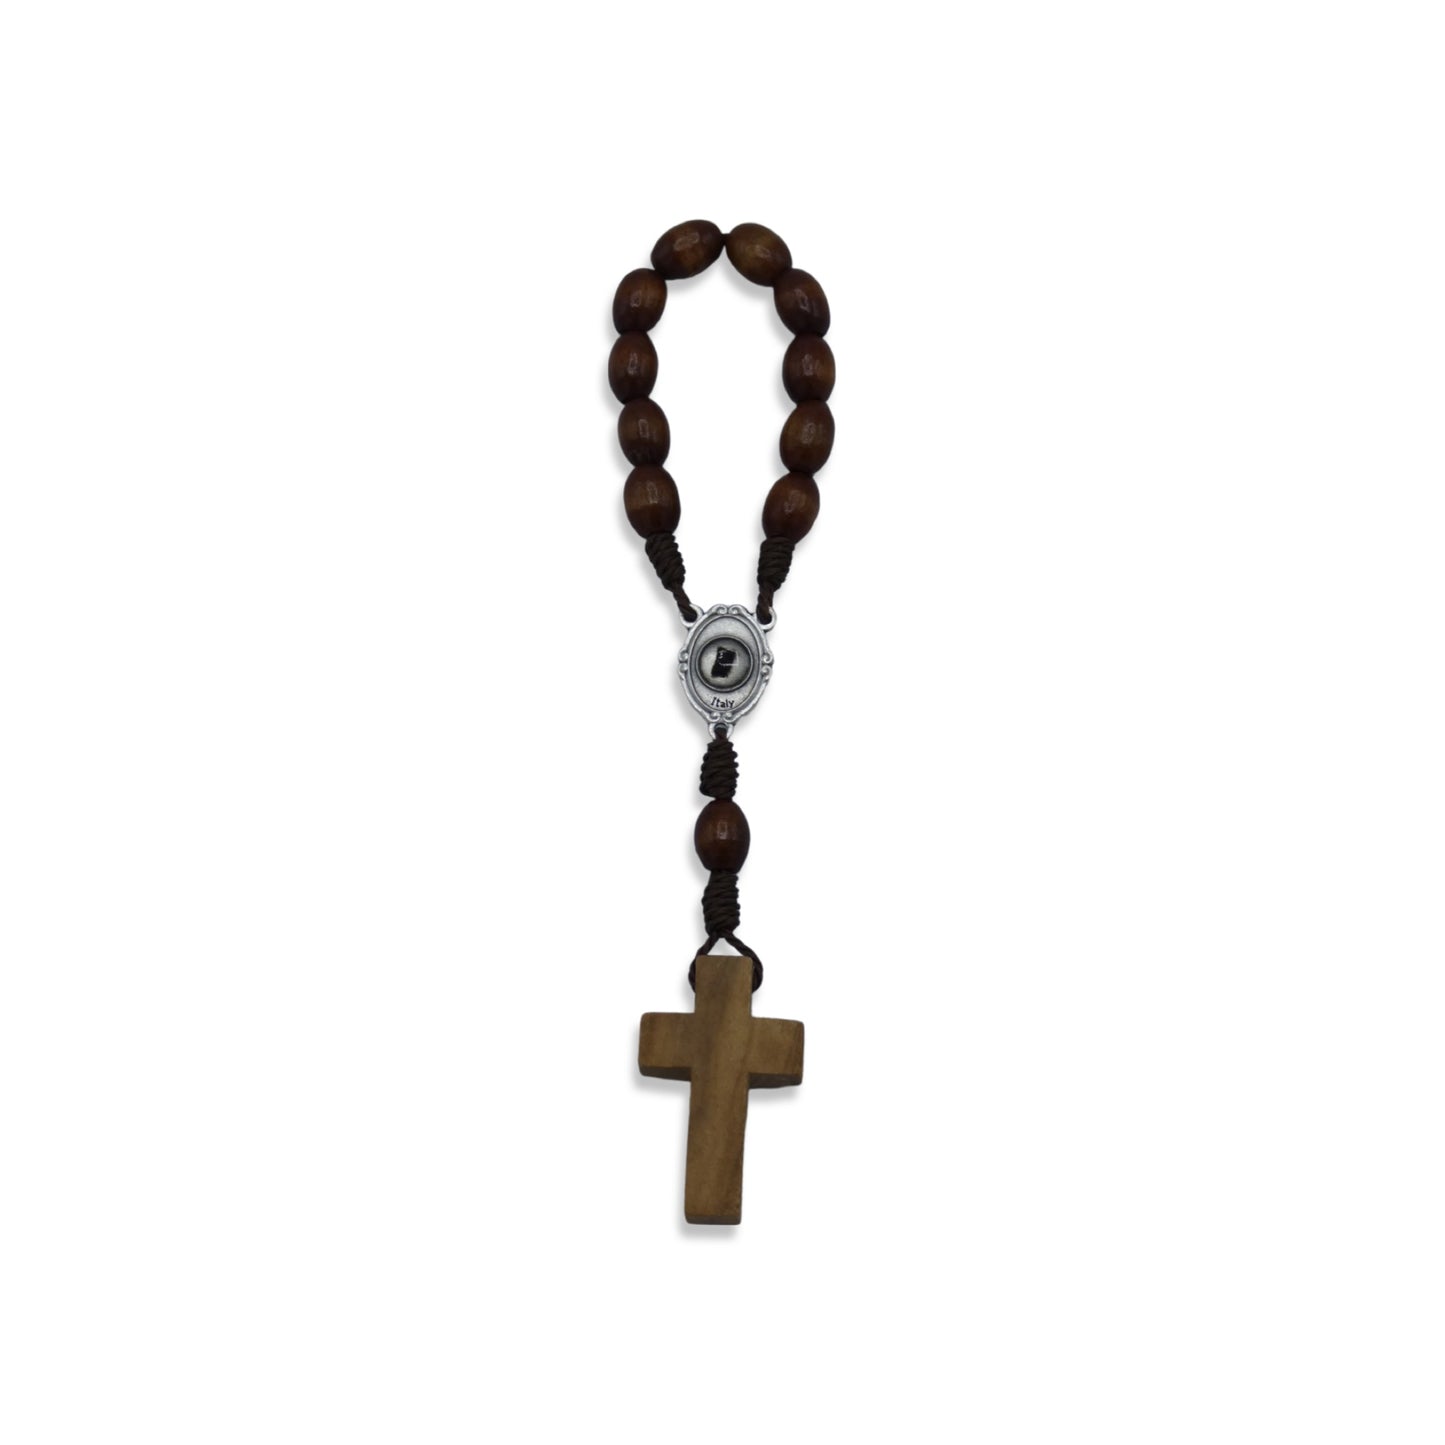 Padre Pio Wooden Decade Rosary with Relic